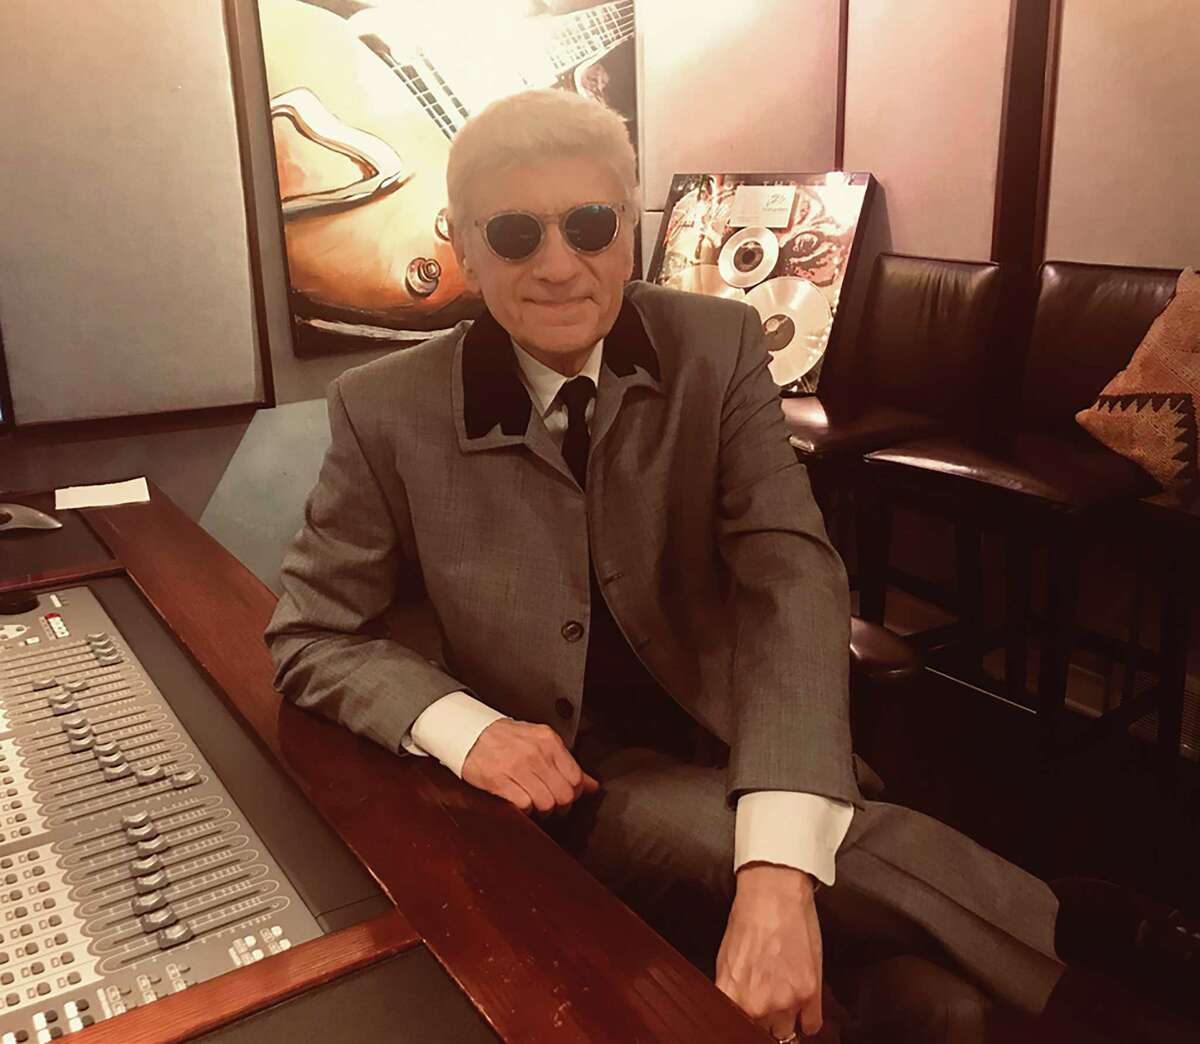 Former Styx vocalist Dennis DeYoung will release his new solo album “26 East, Vol. 1” on May 22.